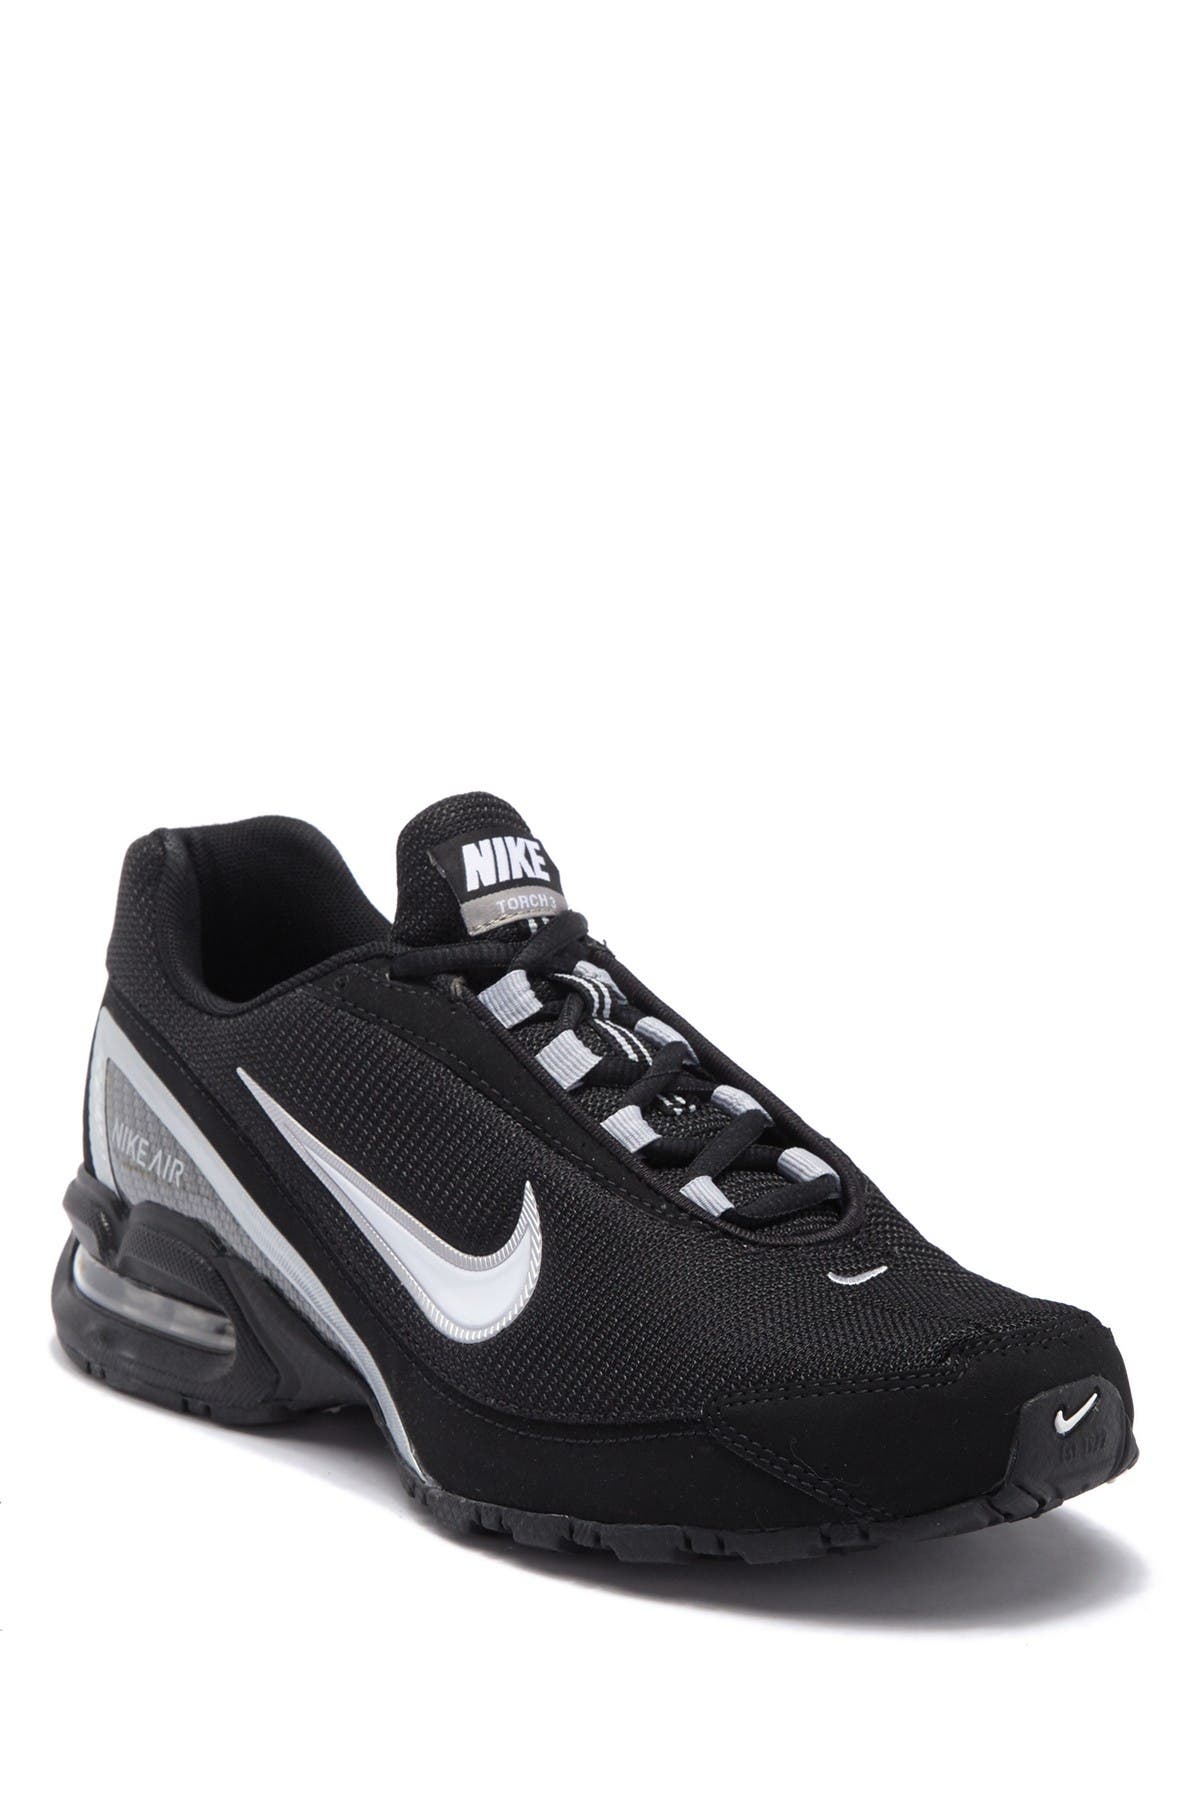 nike max torch 3